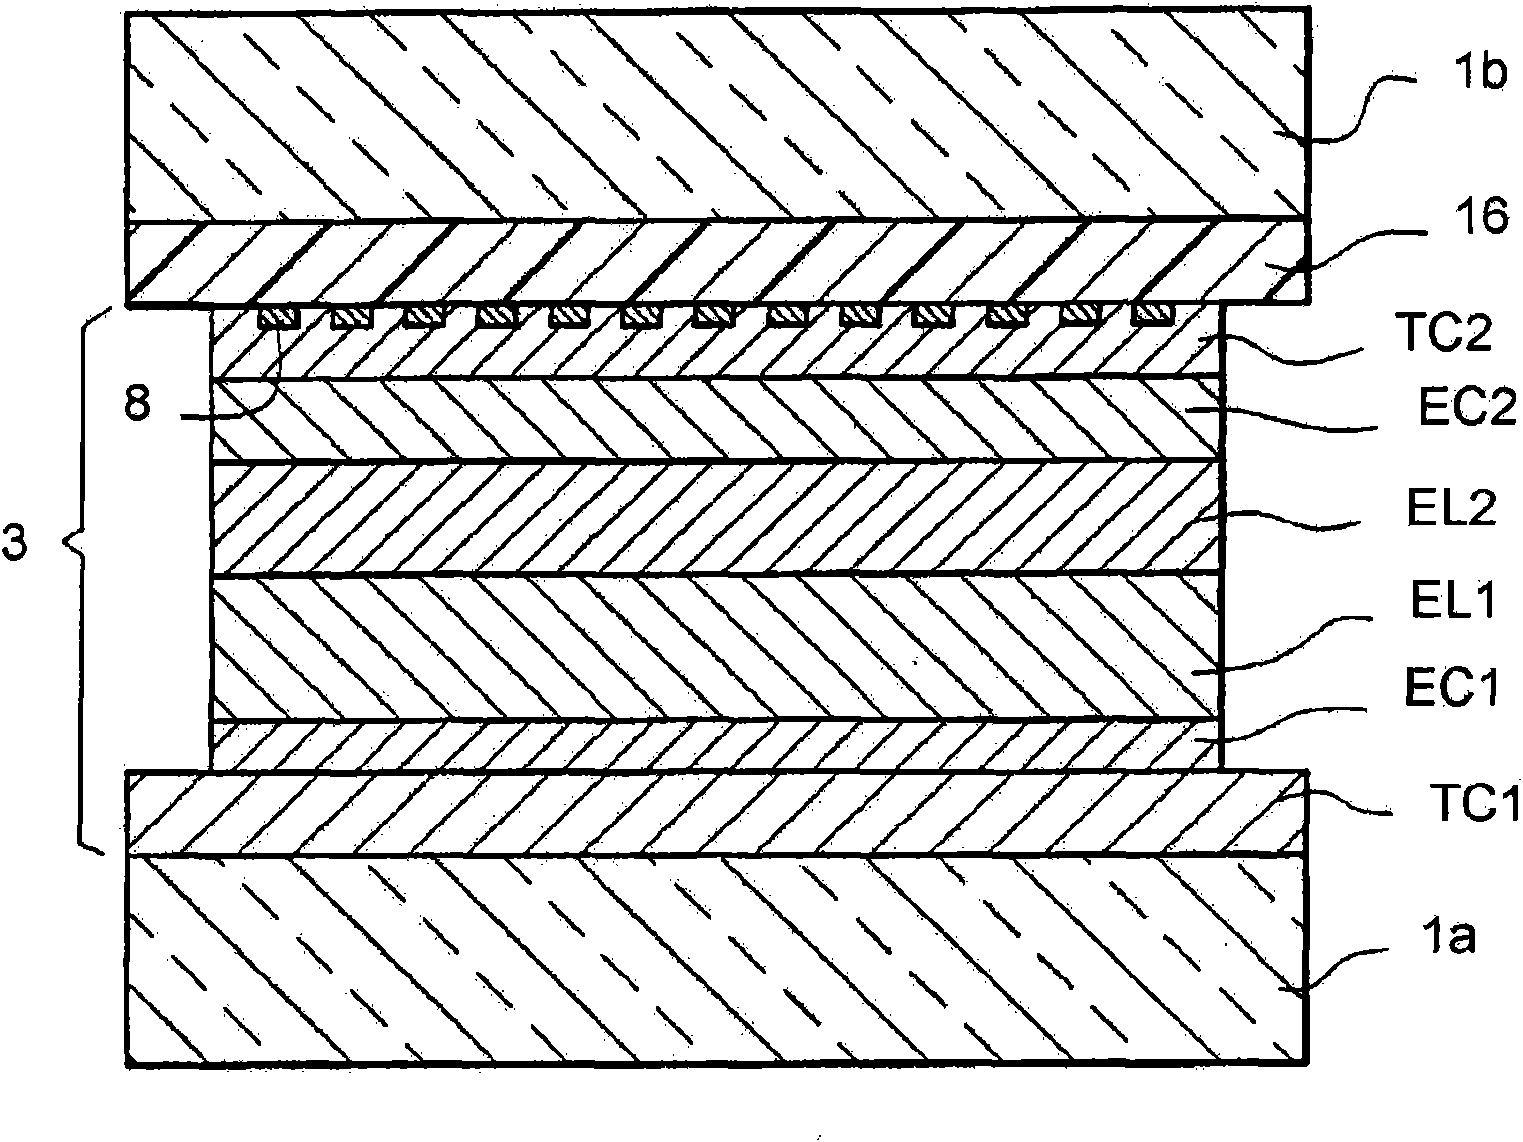 Electrochromic device including a meshing